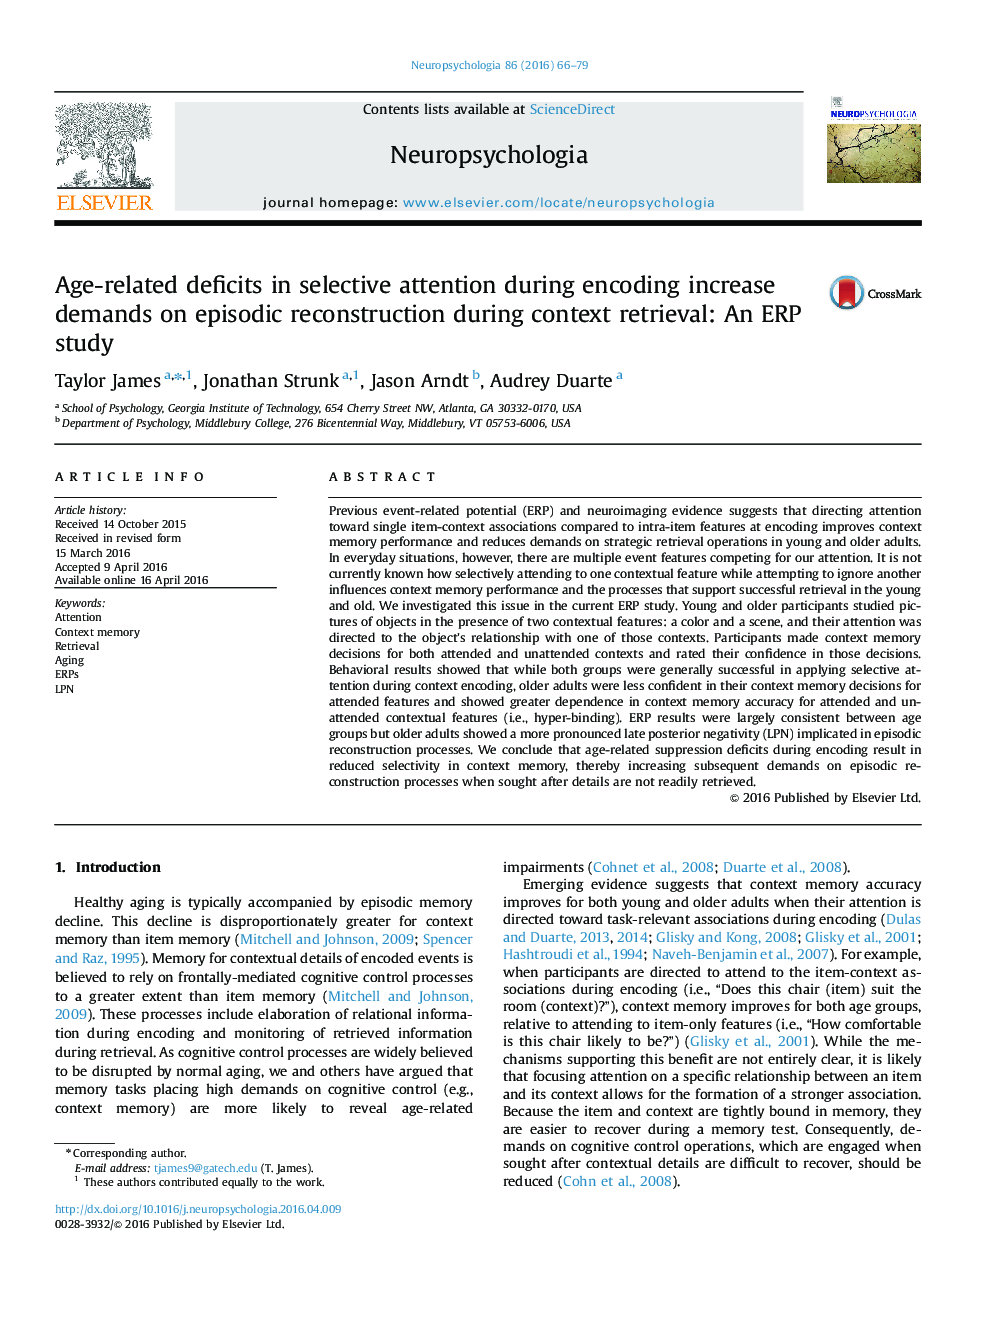 Age-related deficits in selective attention during encoding increase demands on episodic reconstruction during context retrieval: An ERP study